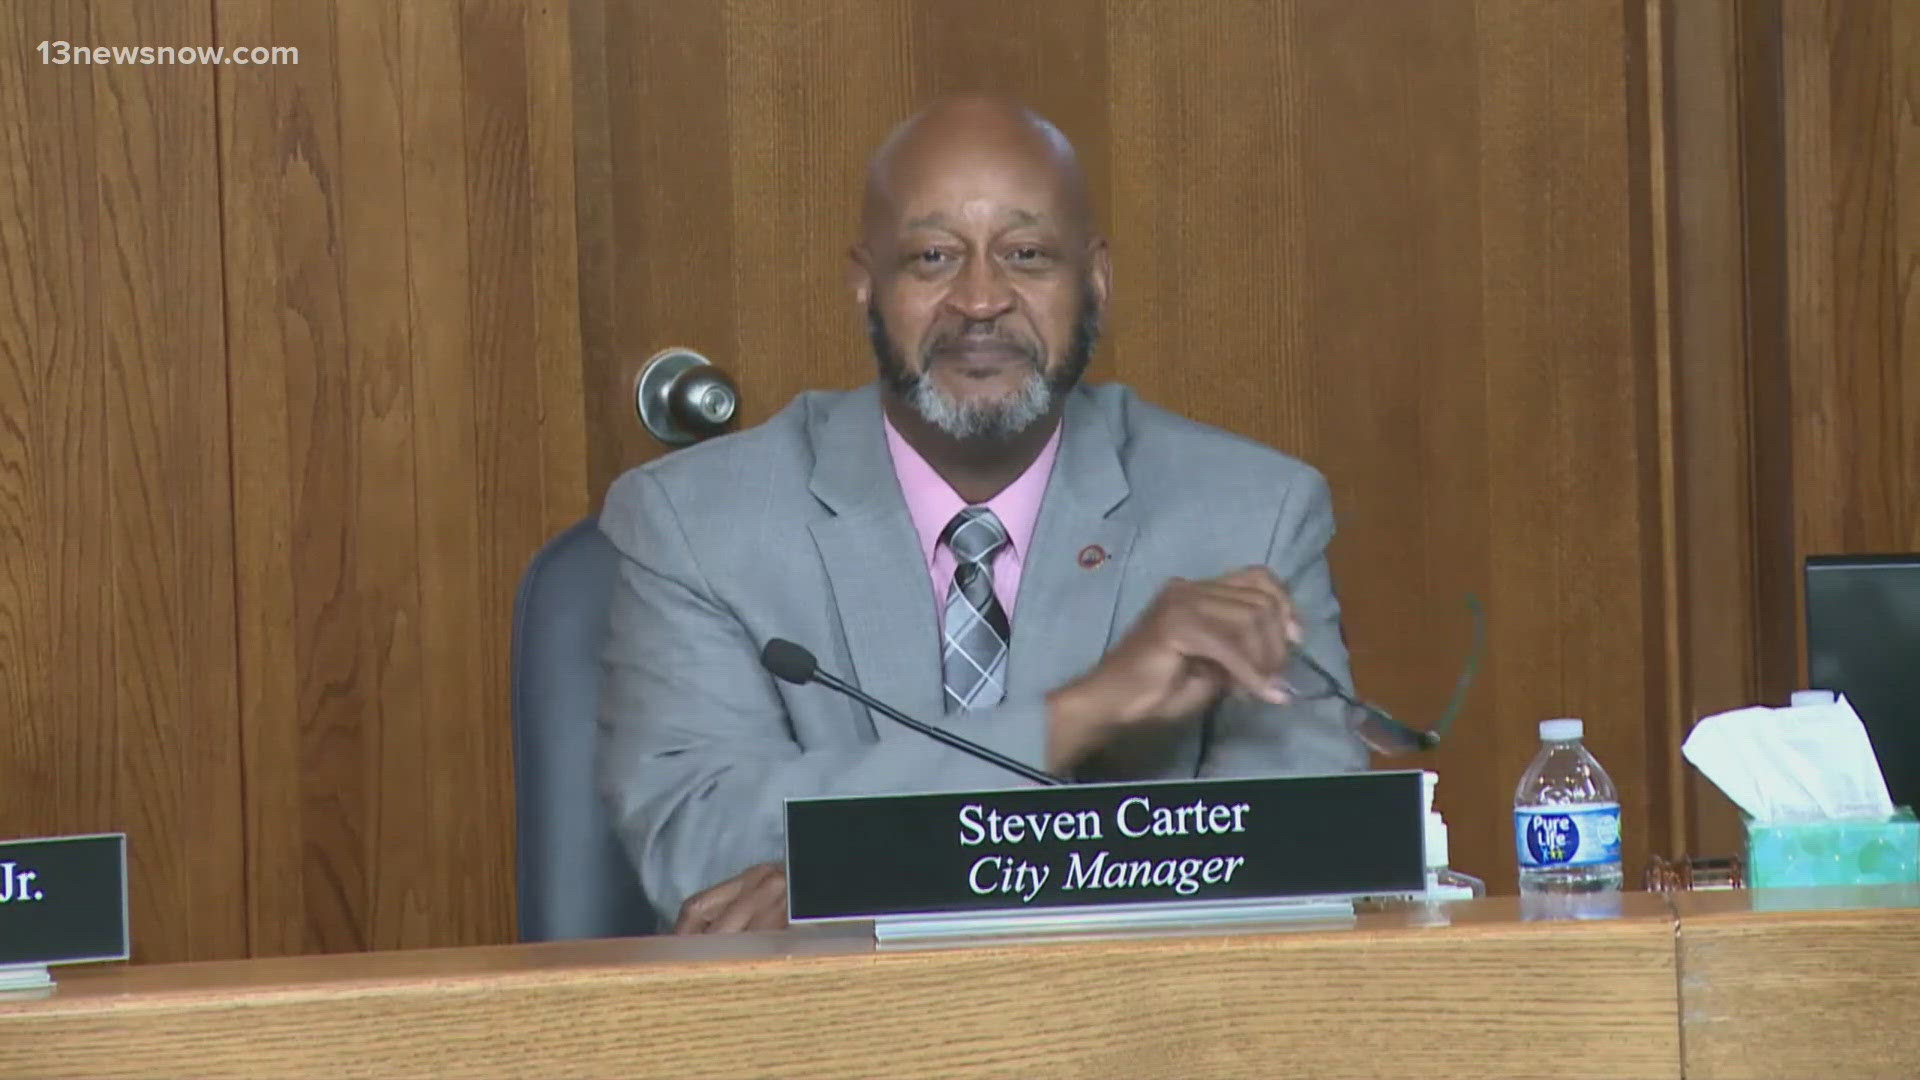 Tonight, marked the first Portsmouth city council meeting for the new city manager, Steven Carter.